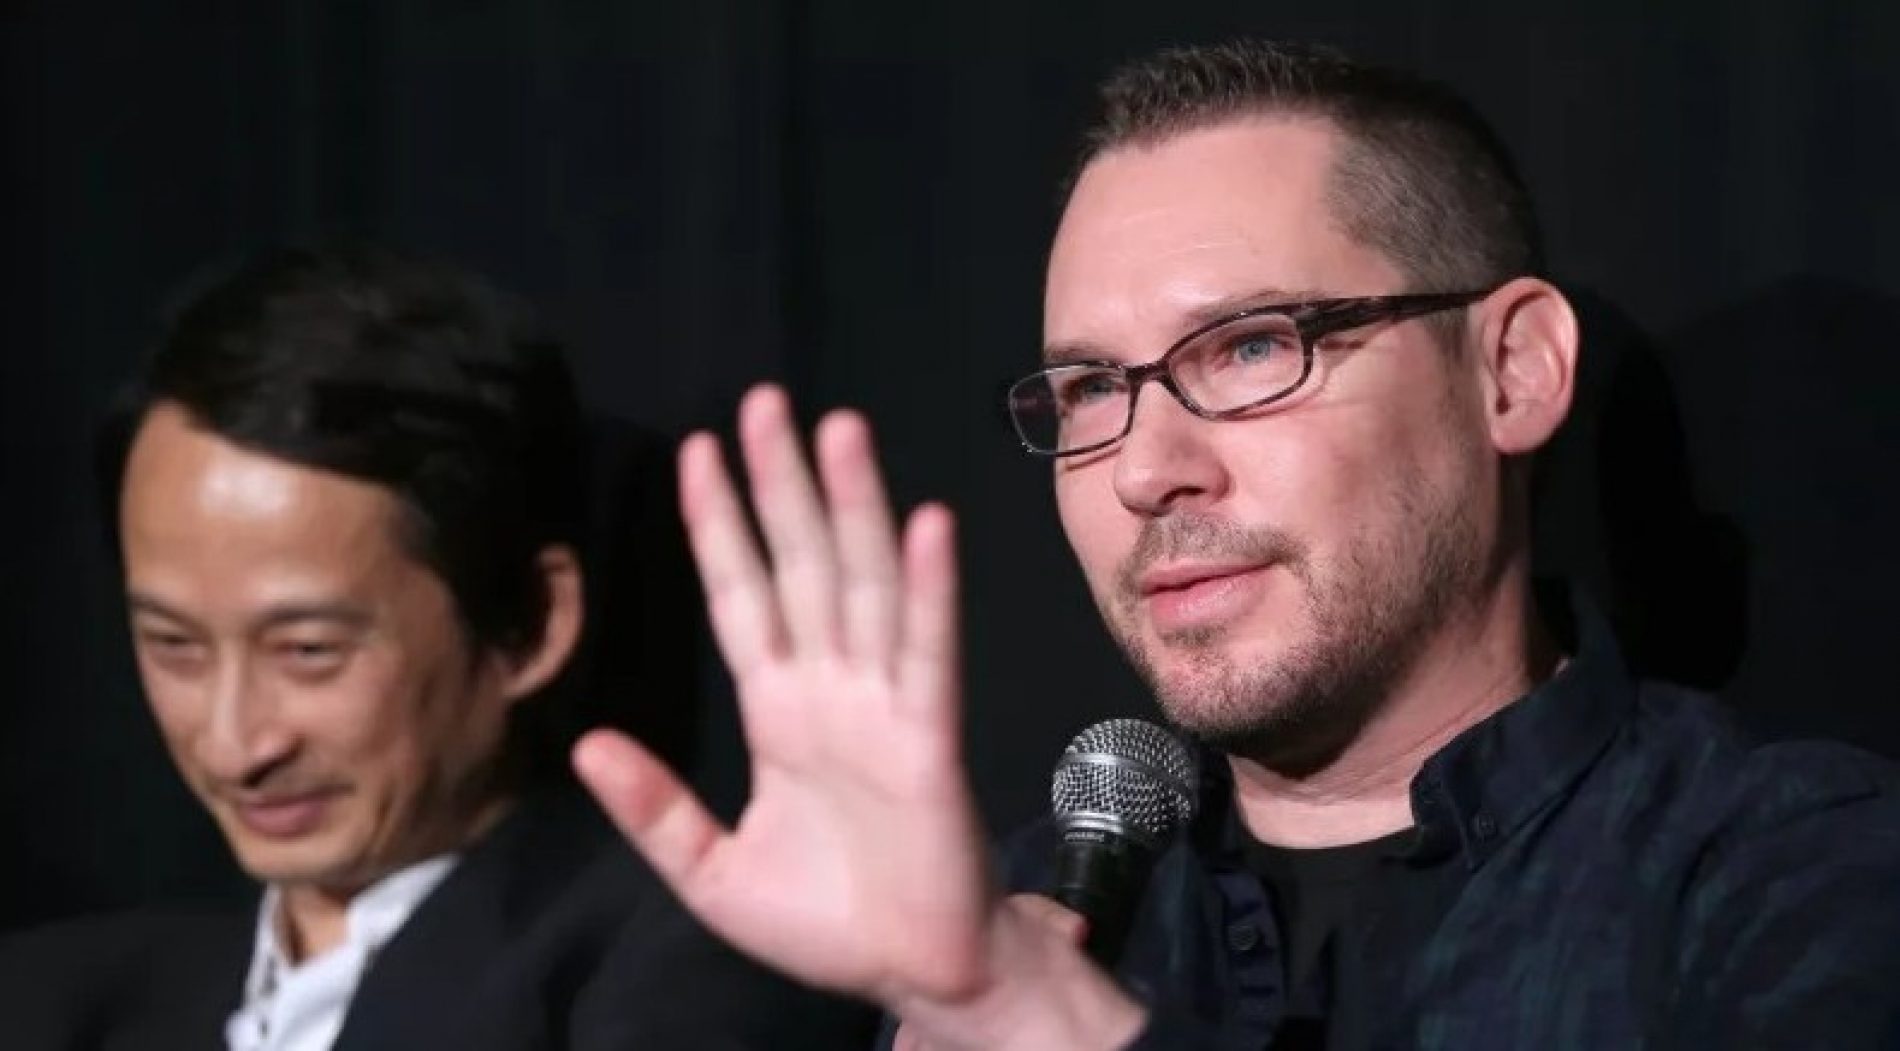 Bryan Singer preemptively denies allegations against him, slamming upcoming Esquire story as “Rehash” Of “False Accusations”